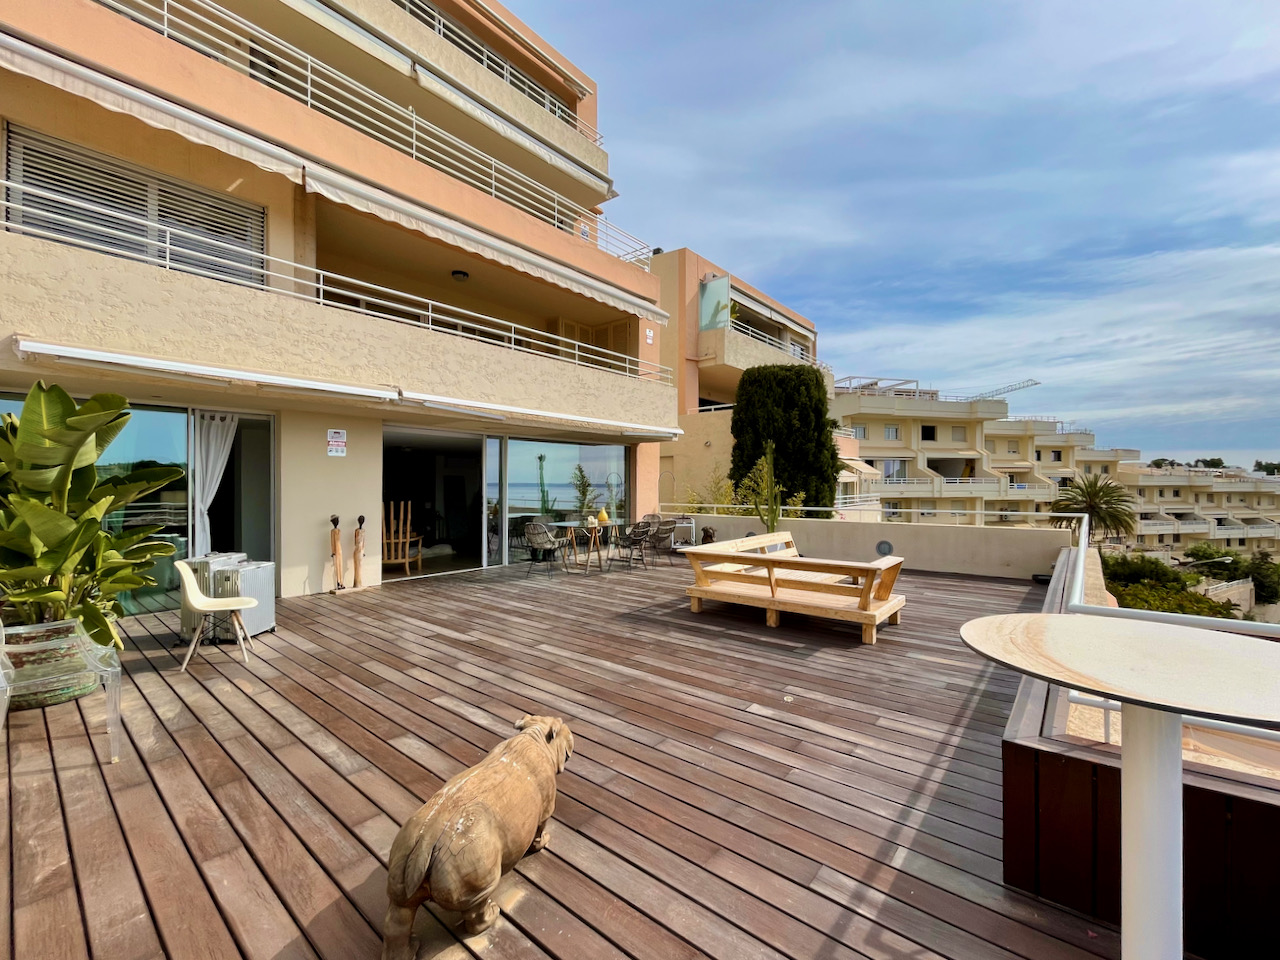 Flat with sea views and terrace in Cas Catala, Mallorca.